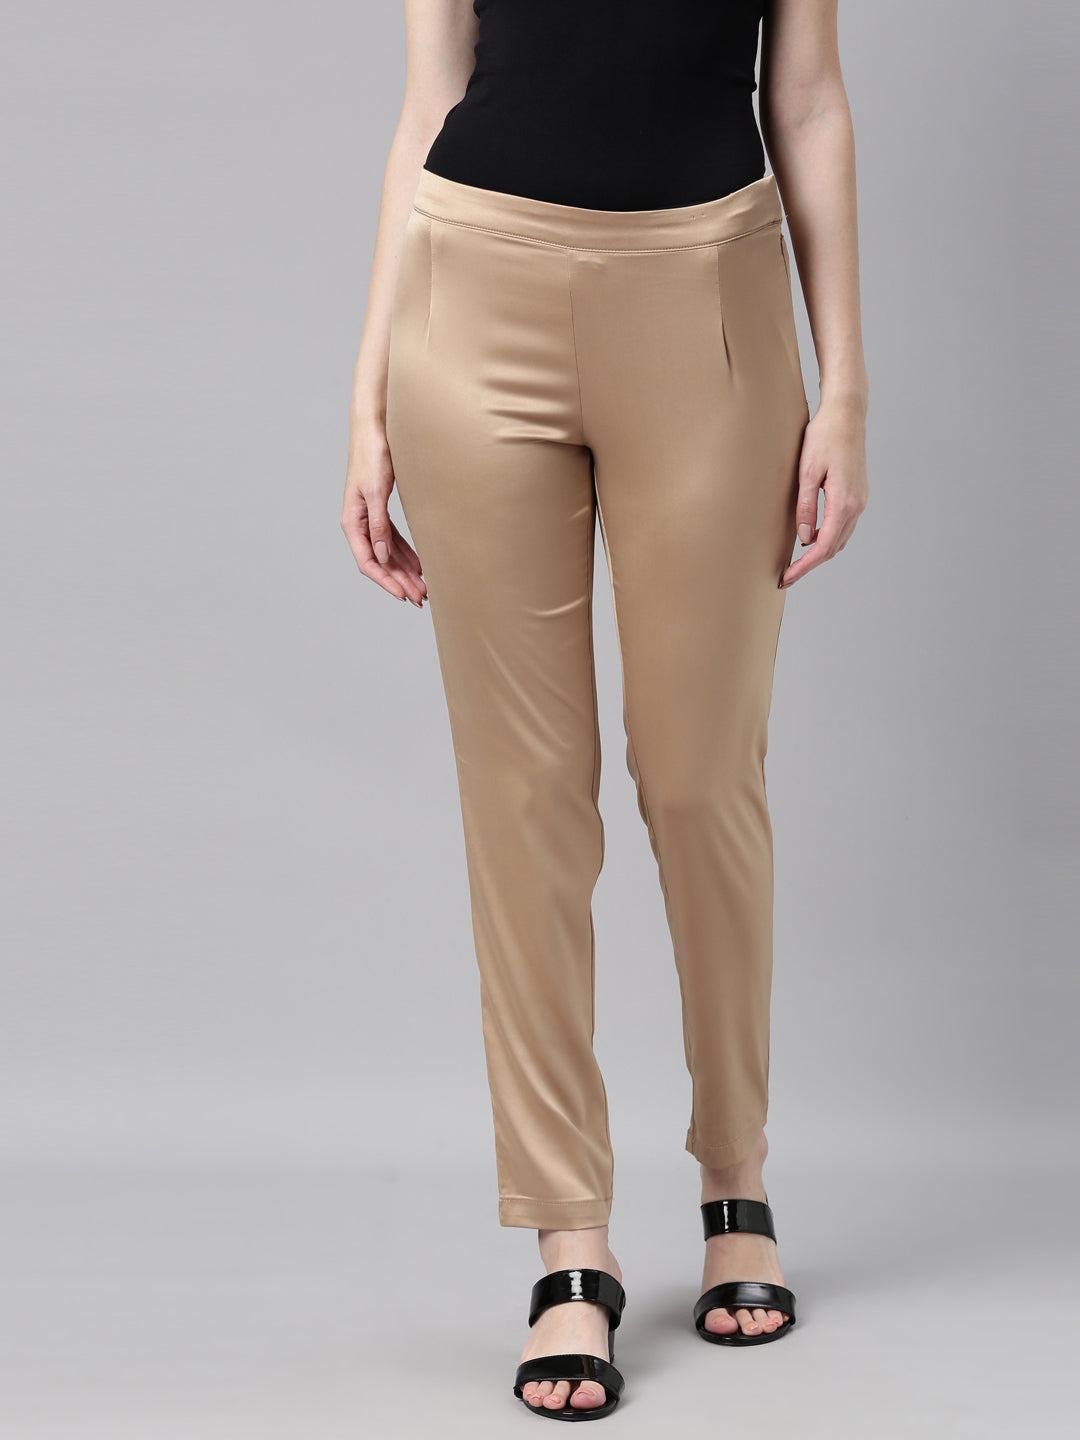 Buy GO COLORS Gold Womens Solid Casual Pants